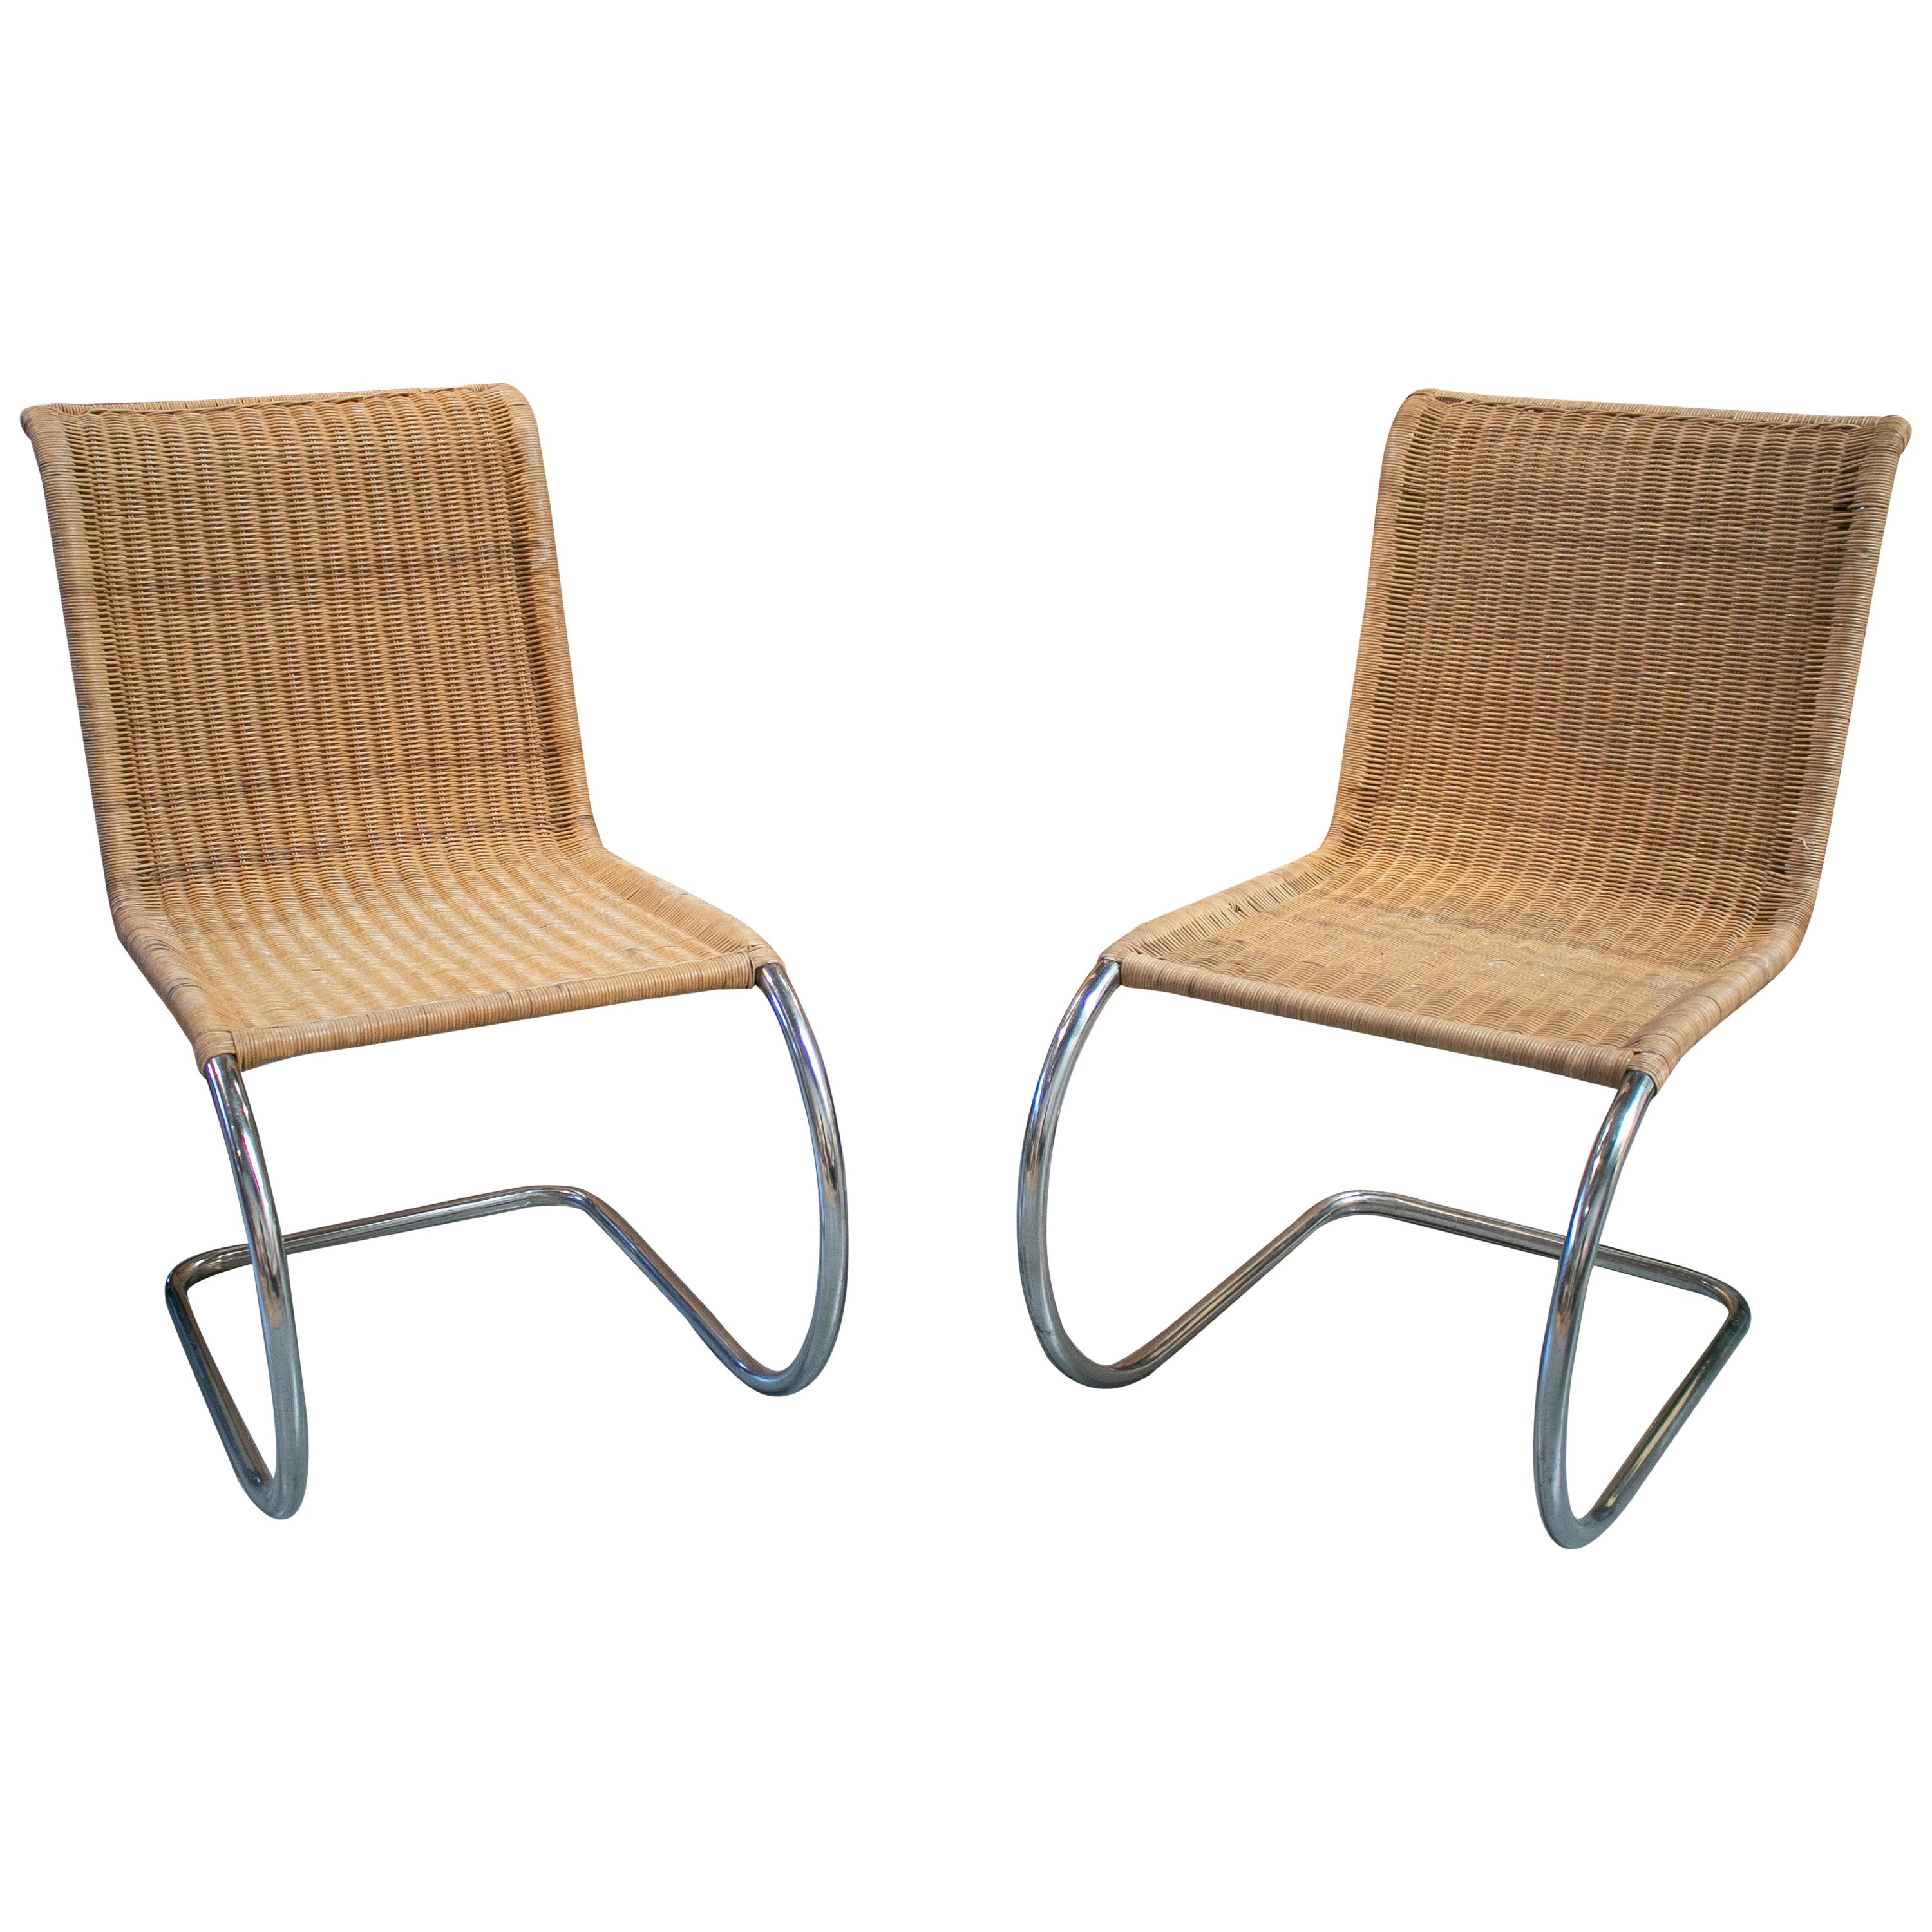 1970s Italian Designer Chairs with Steel Structure and Weaved Rattan